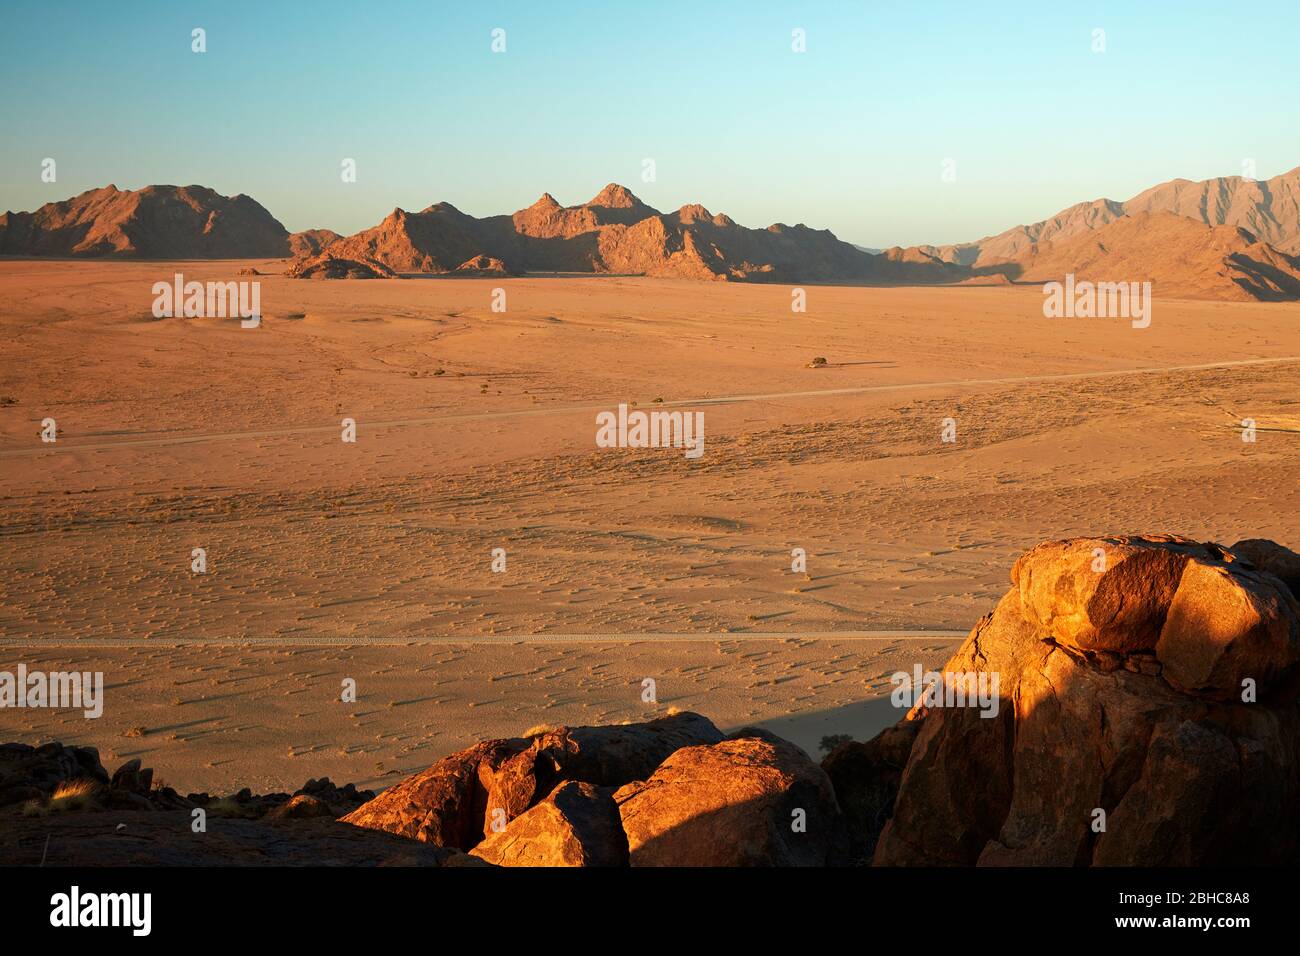 View of plain and mountains from high on a rock koppie above Desert Camp, Sesriem, Namib Desert, Namibia, Africa Stock Photo